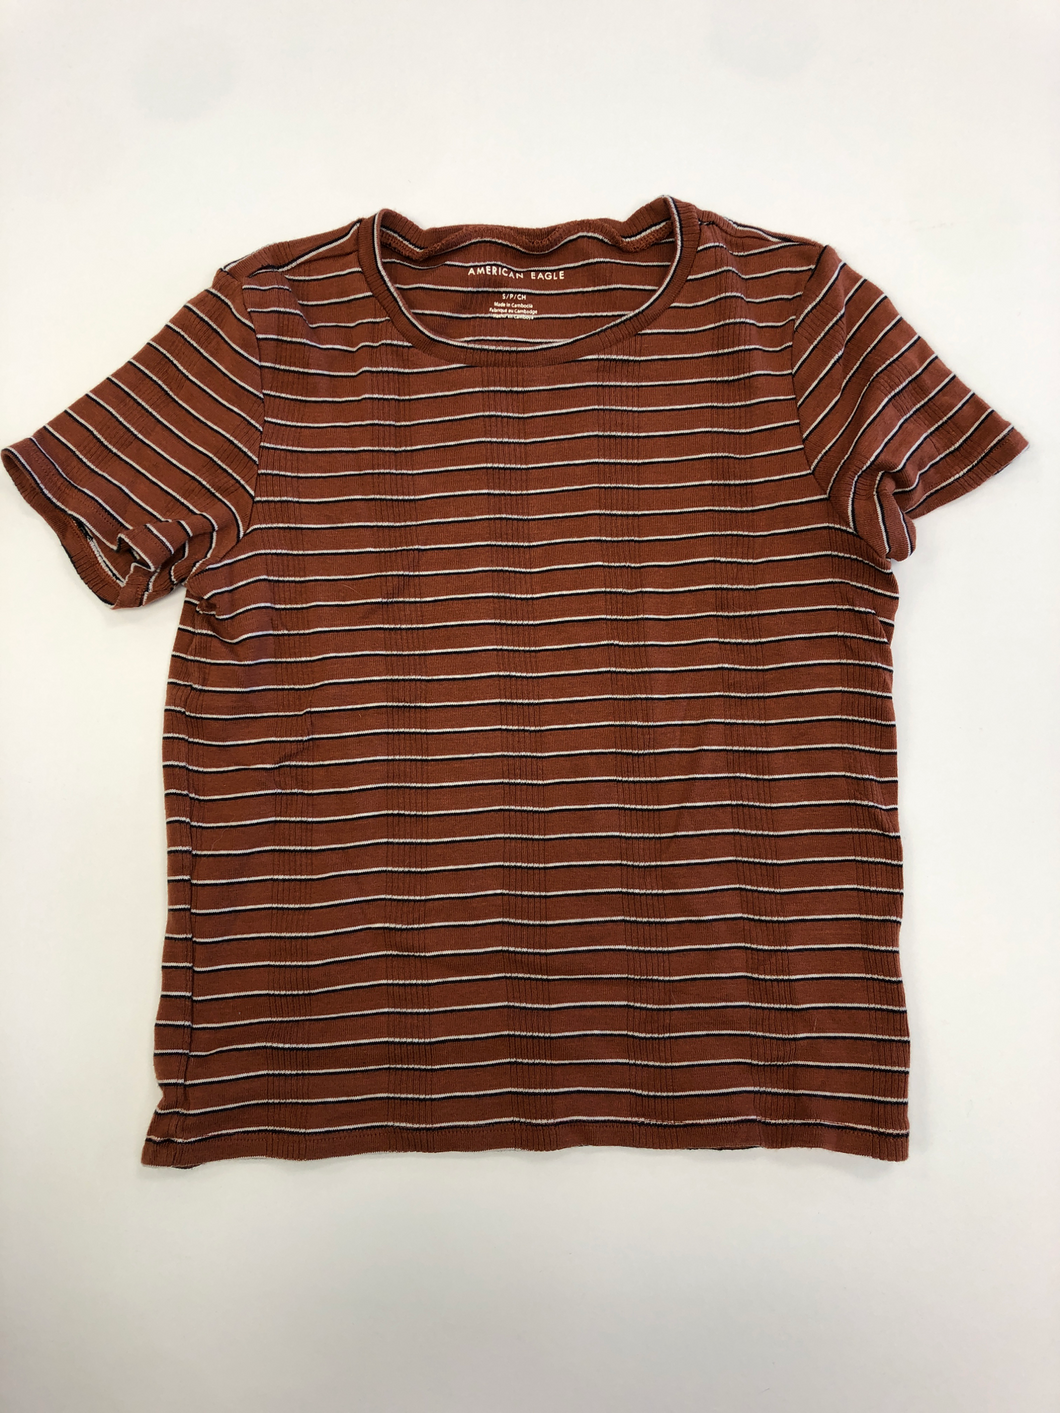 American Eagle Short Sleeve Top Size Small